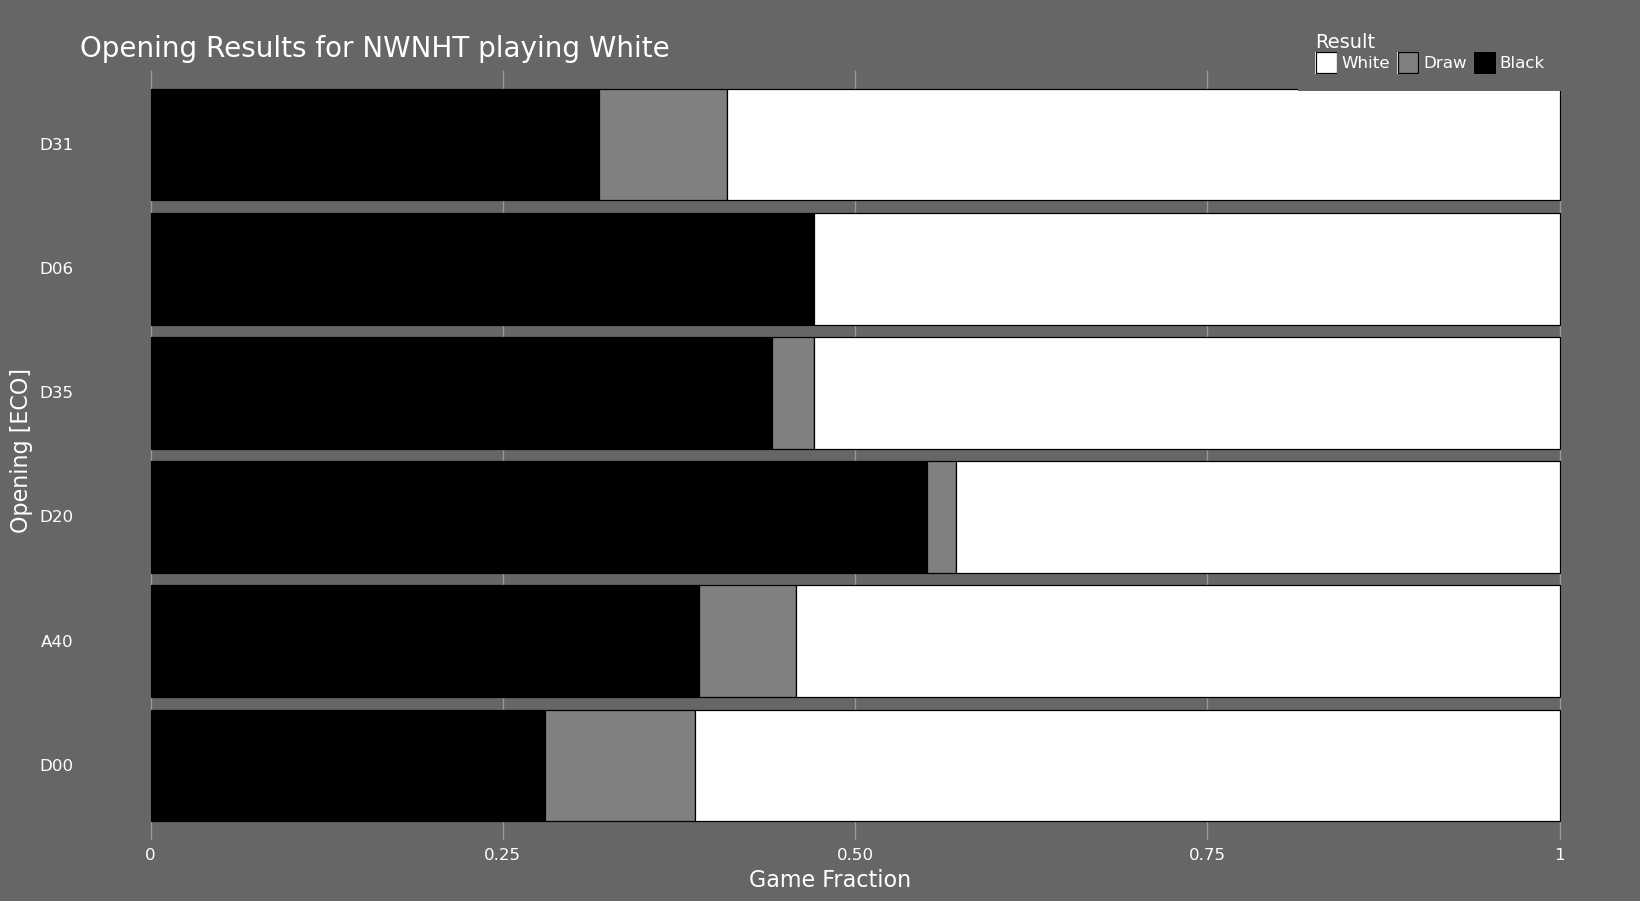 NWNHT Top Openings with white